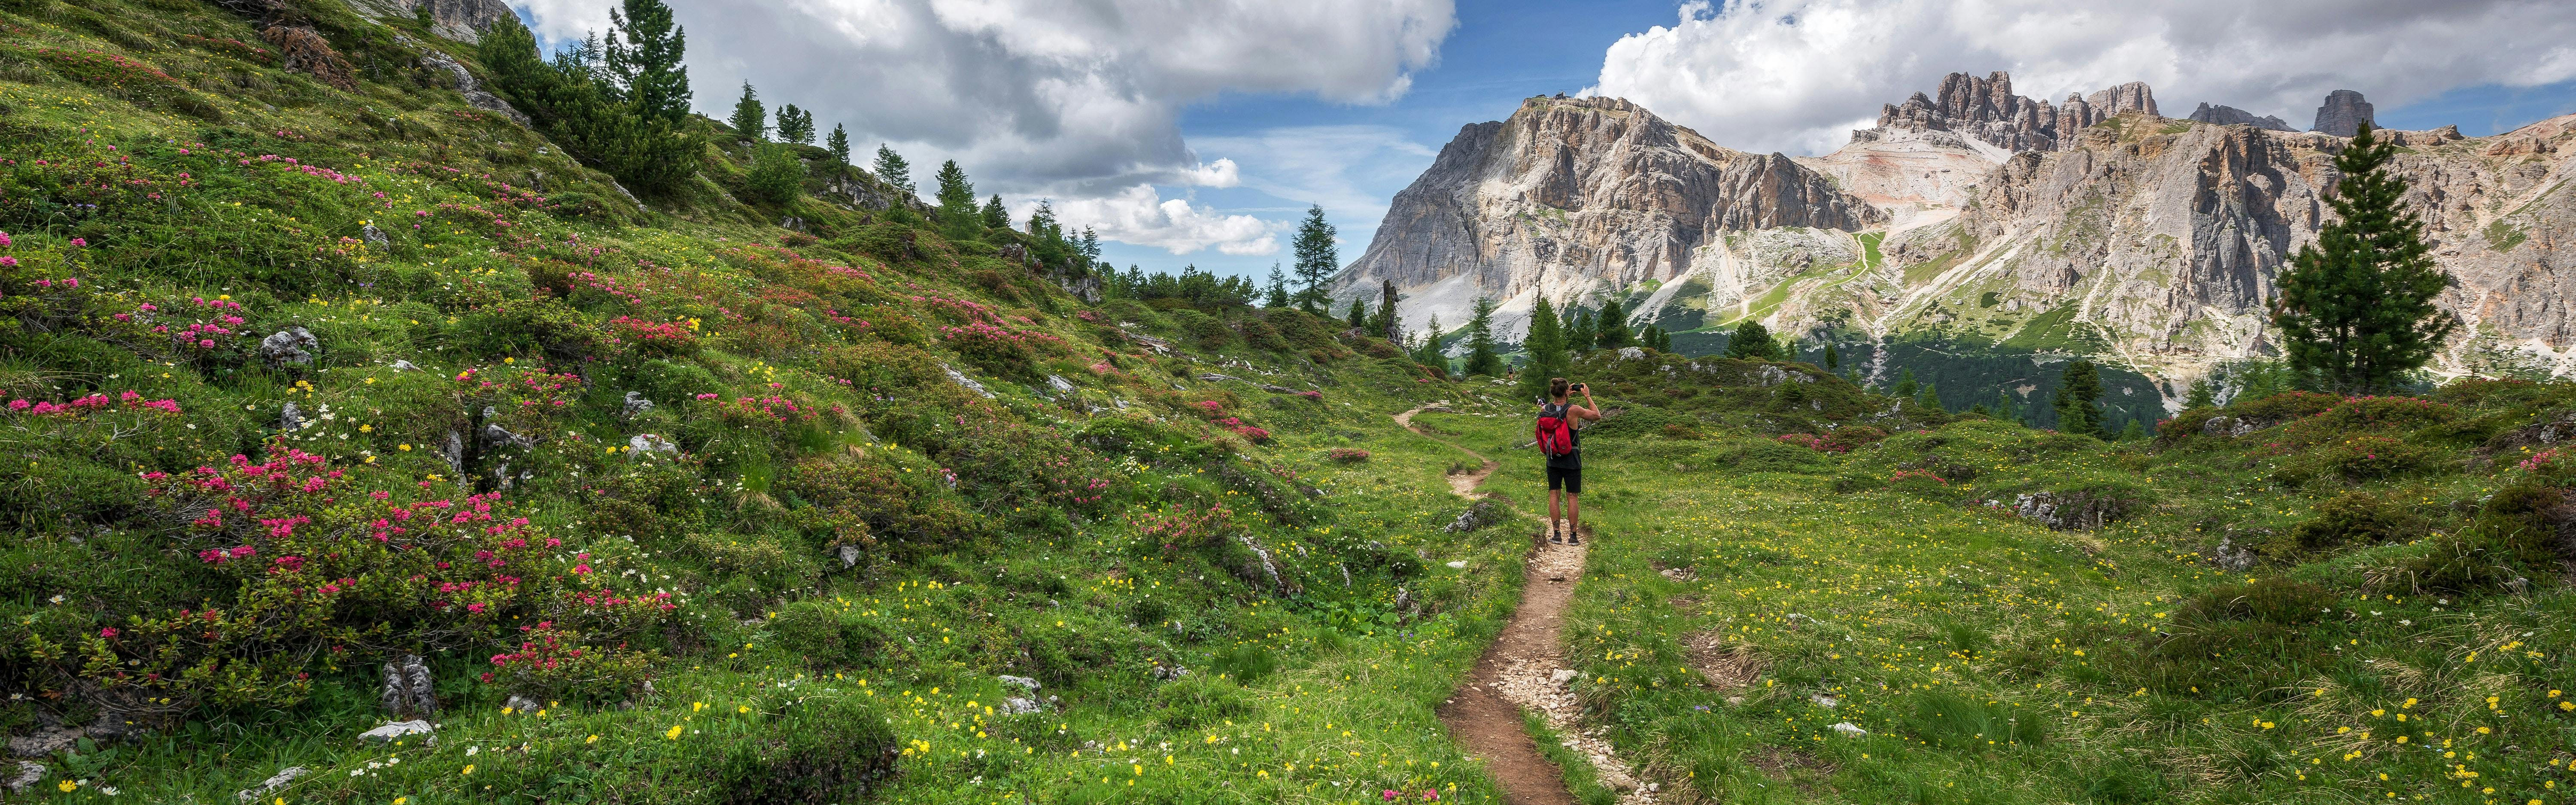 How to Plan a Colorado Backpacking Trip for the First Time